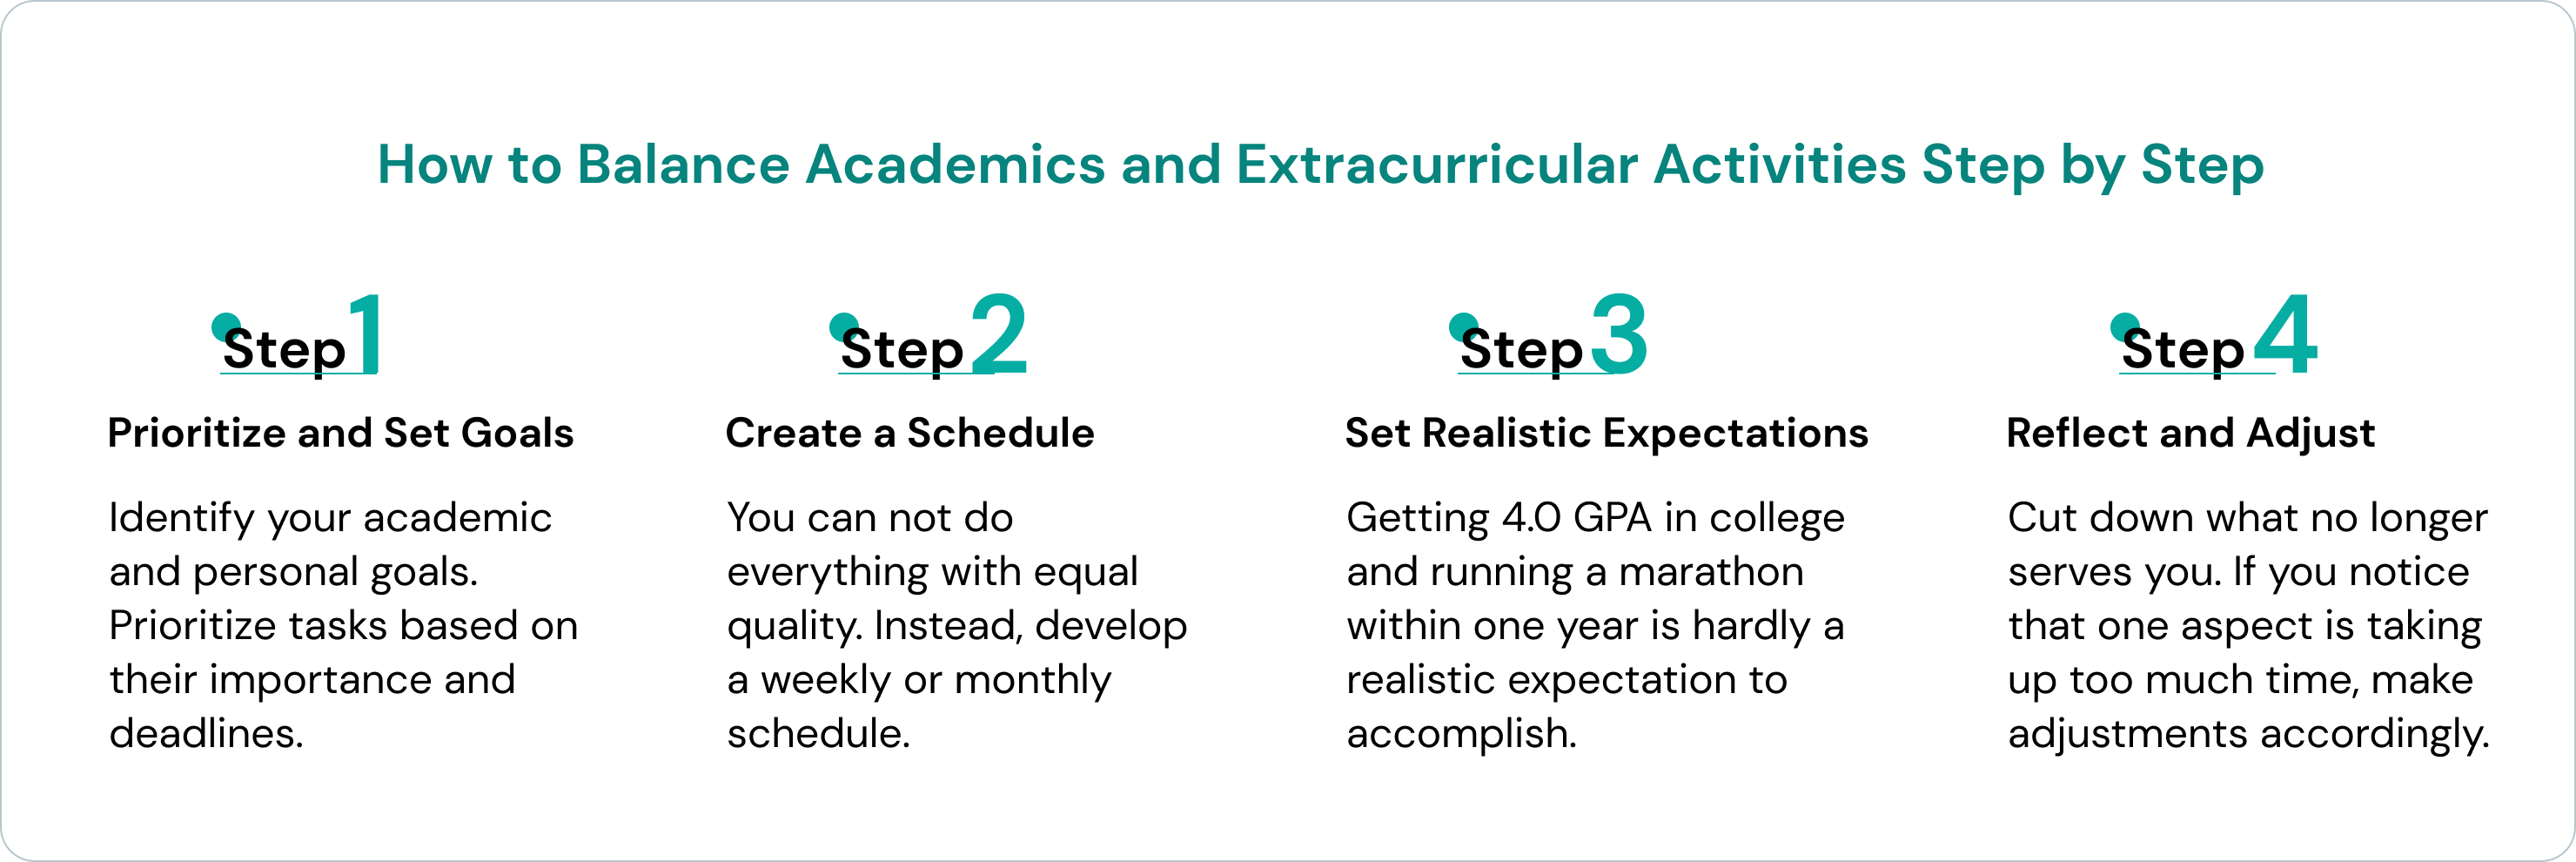 How to Balance Academics and Extracurricular Activities Step by Step